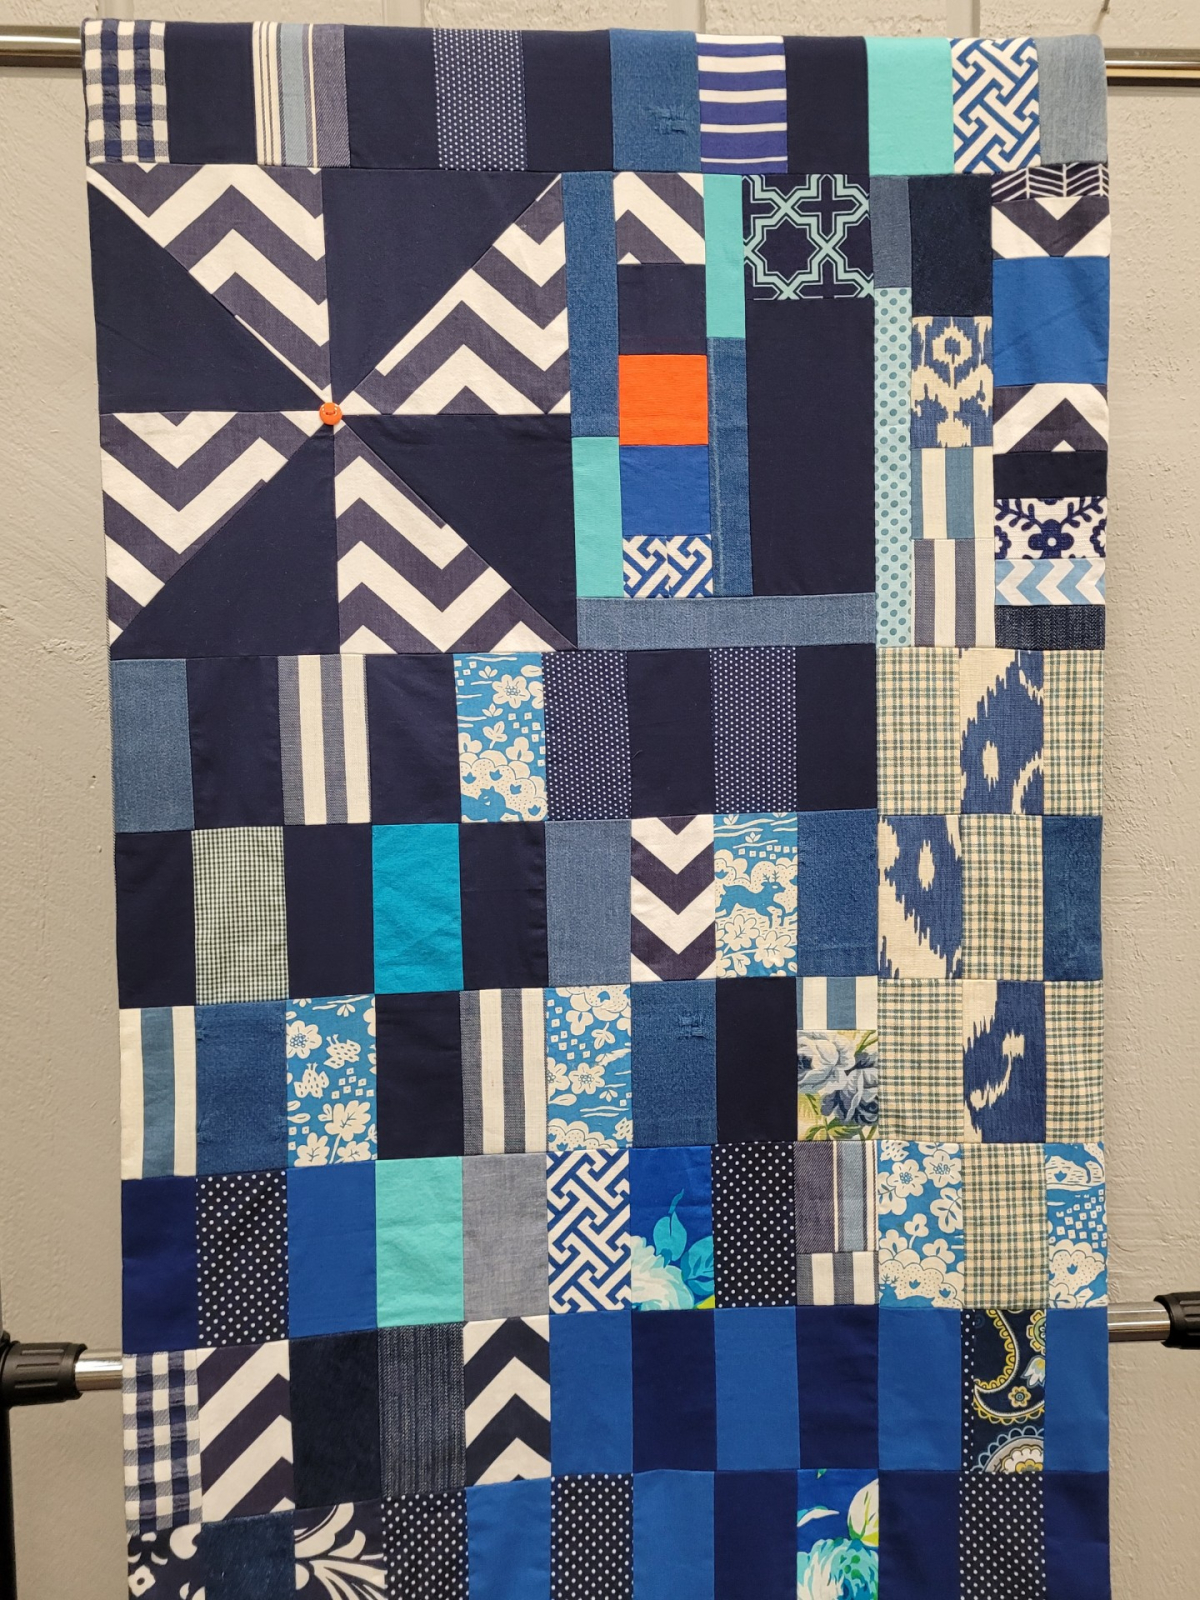 A closer image of the entire front panel of the B. B. King Blues Cotton Sack. The sack features three quilt patterns that relate the story of King's life: the pinwheel, the log cabin, and the nine-patch.